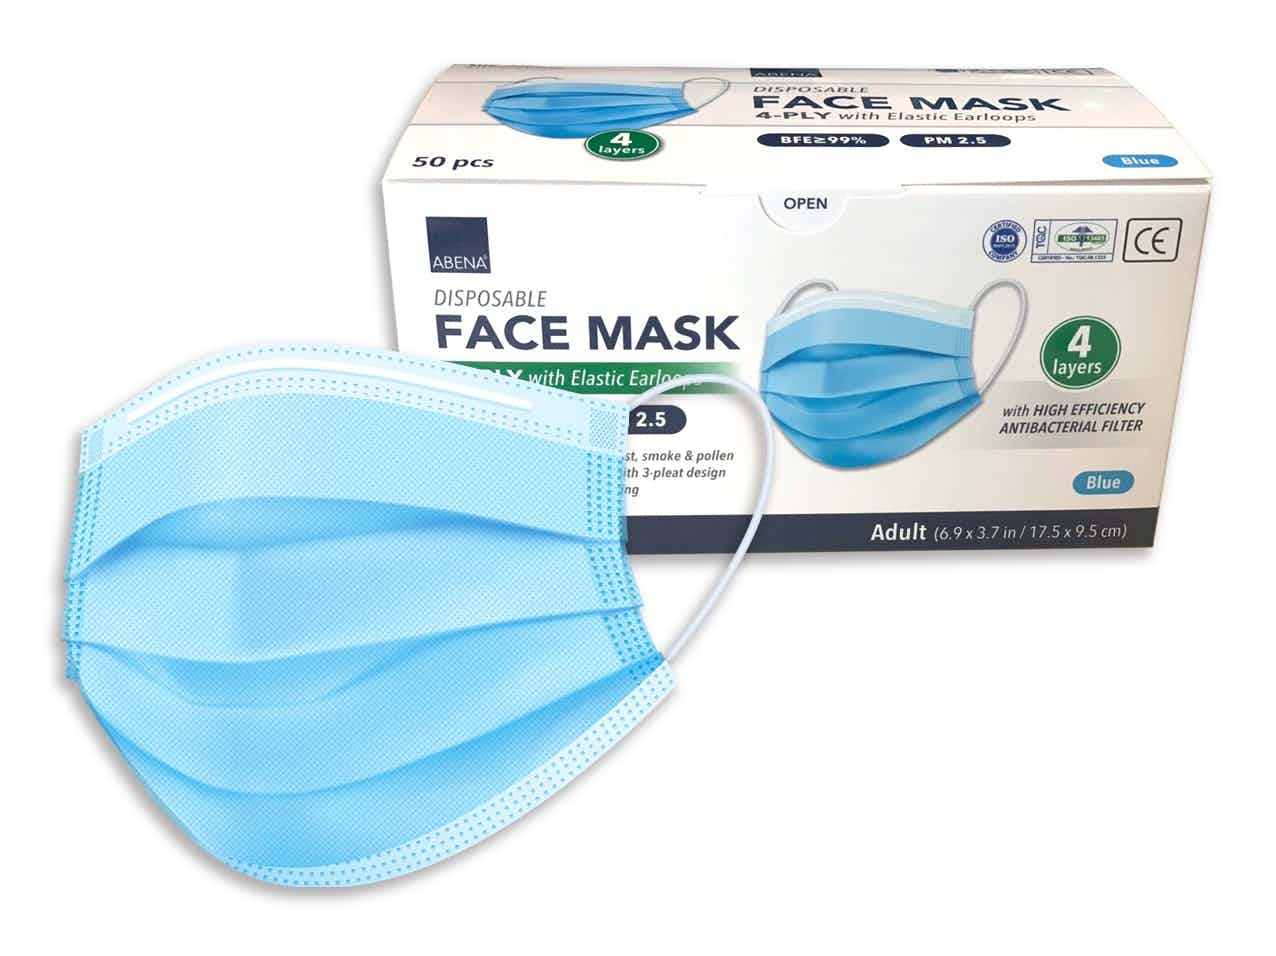 Abena Disposable 4-Ply Face Mask , 1000020586, Blue - Pack of 50 